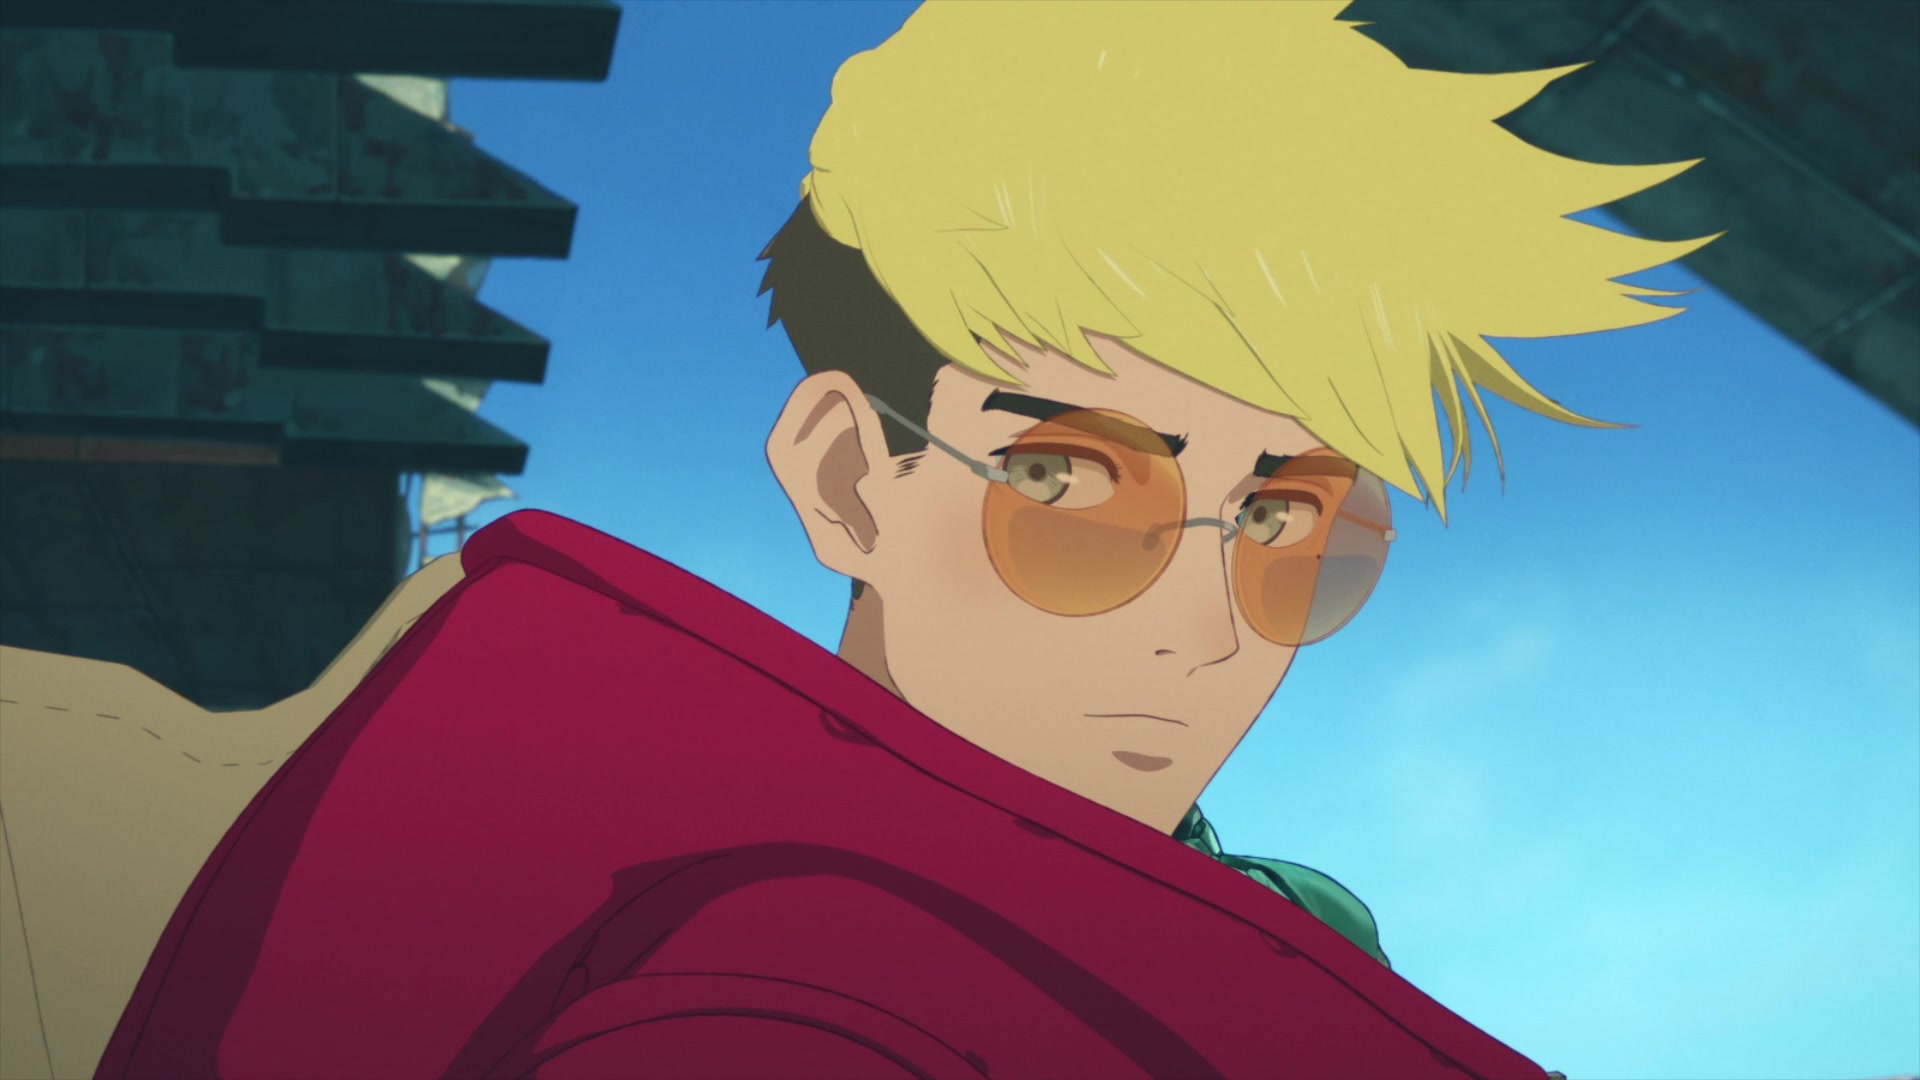 A blond anime boy with round tinted glasses looks solemnly at the viewer.